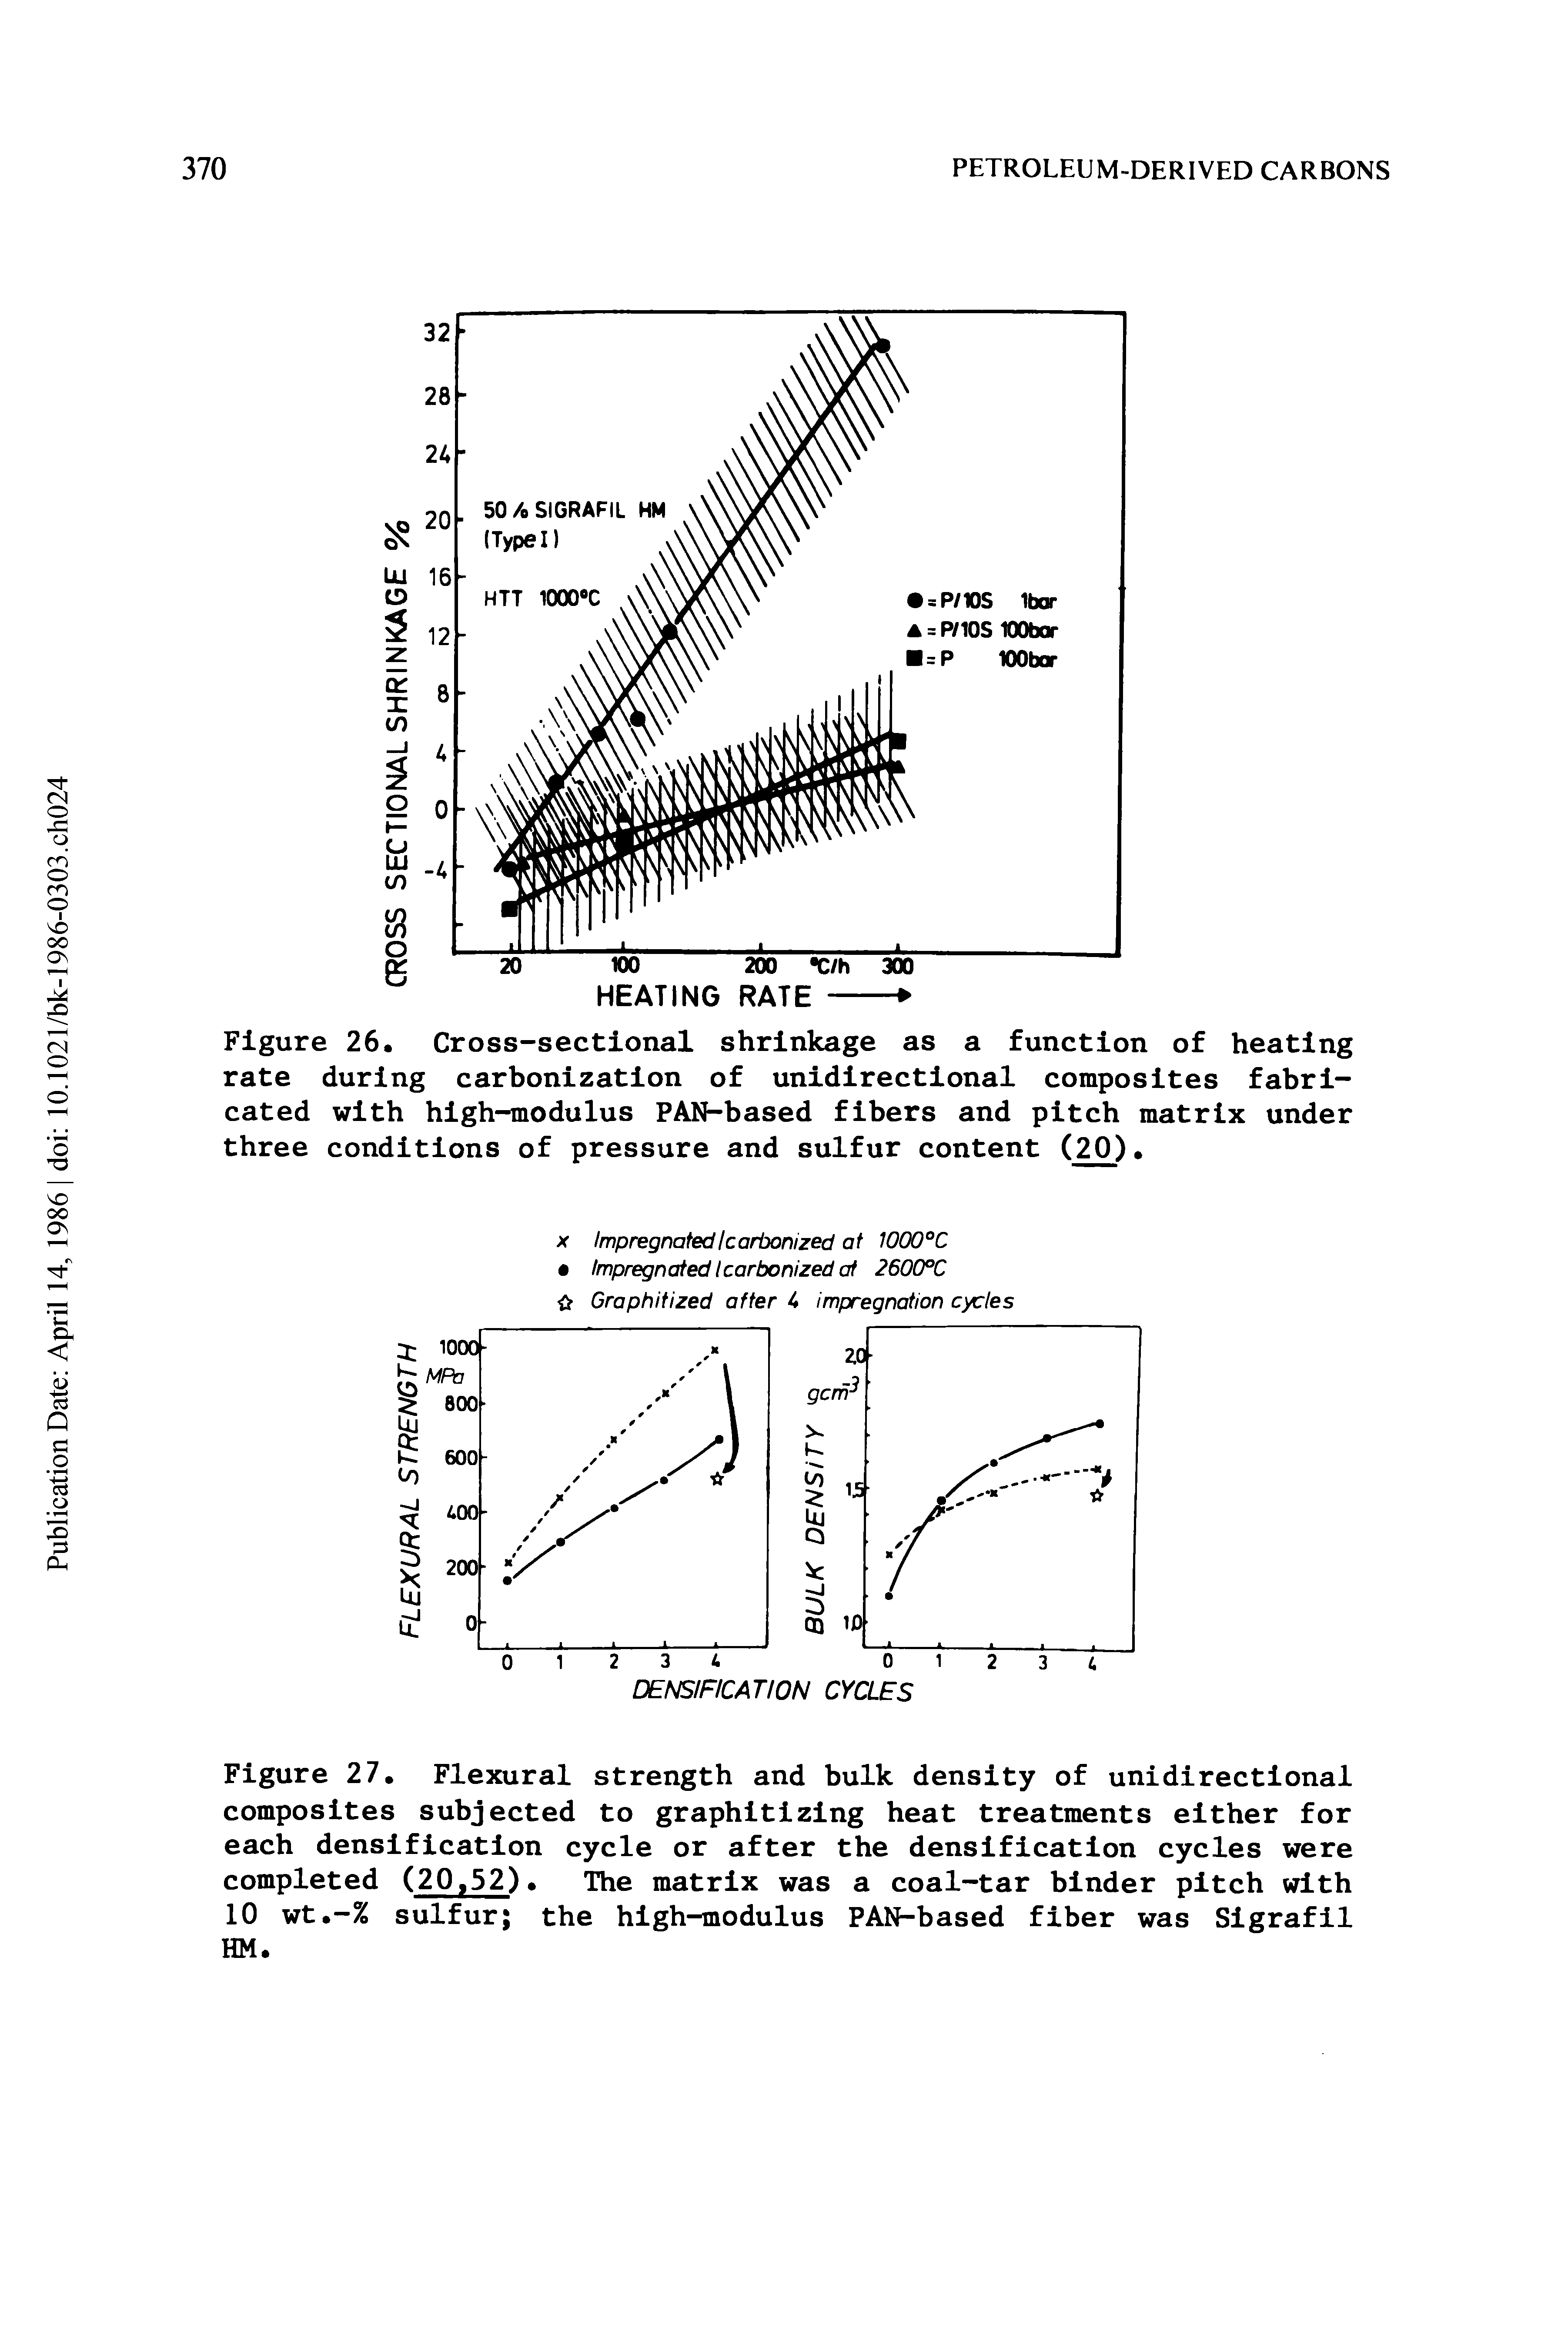 Figure 26. Cross-sectional shrinkage as a function of heating rate during carbonization of unidirectional composites fabricated with high-modulus PAN-based fibers and pitch matrix under three conditions of pressure and sulfur content (20).